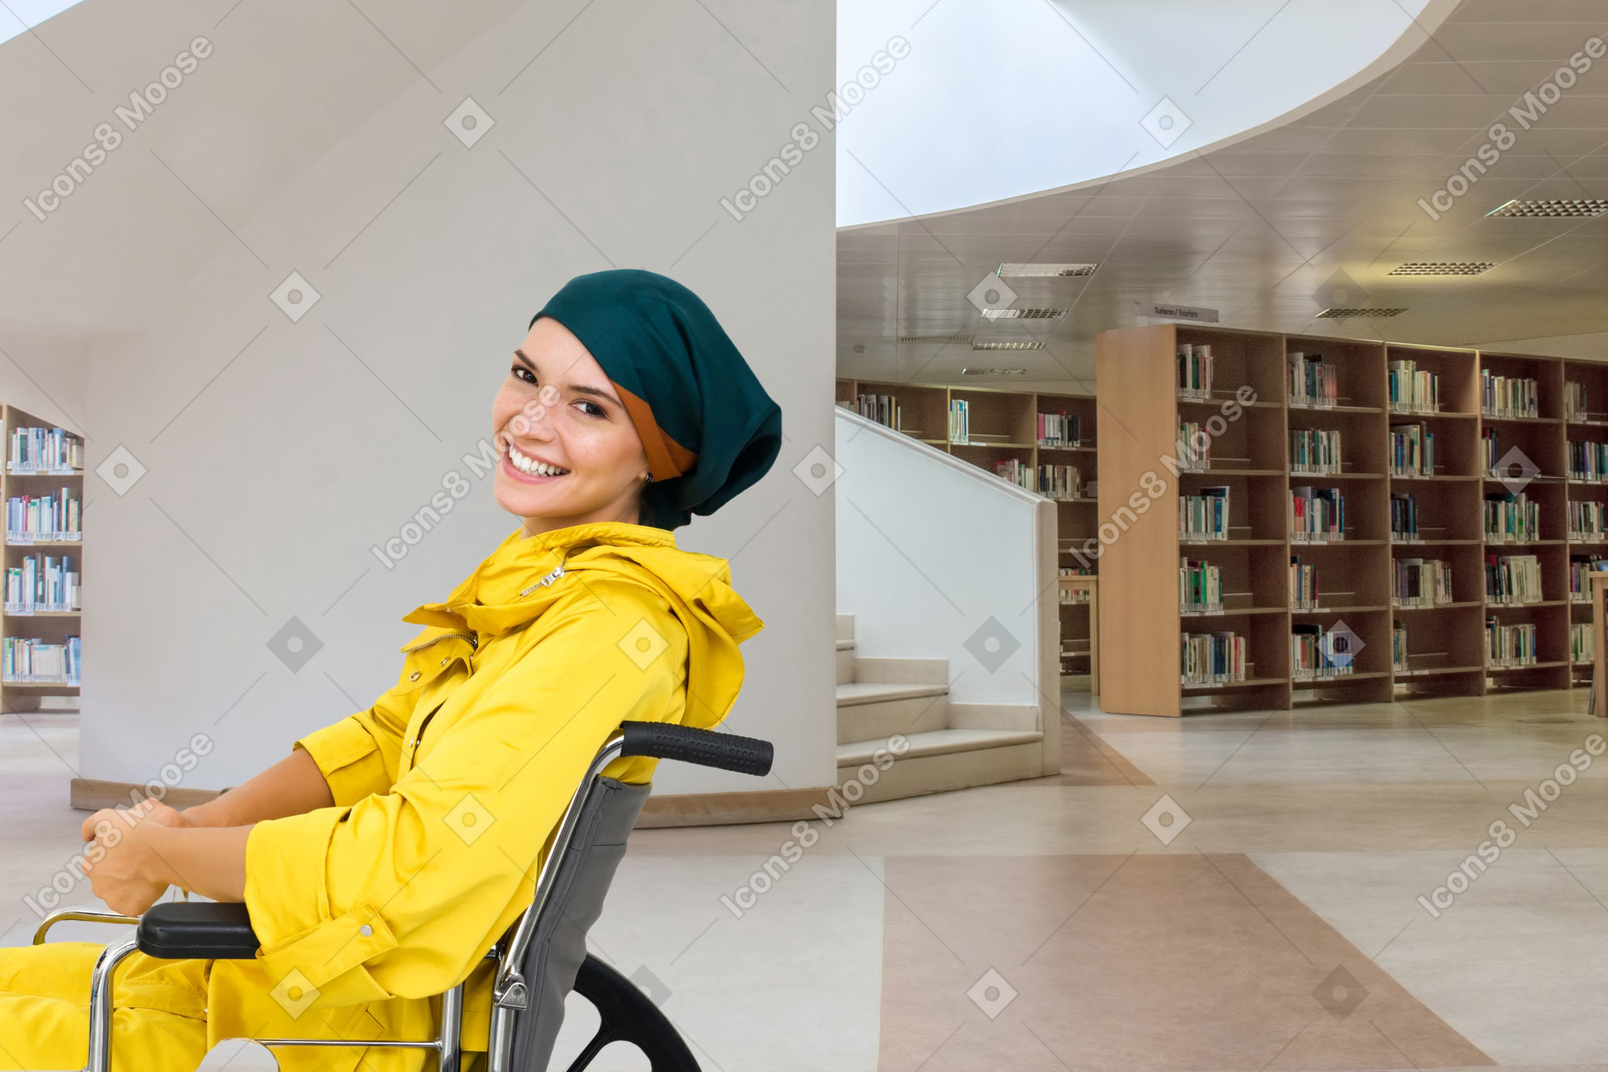 Disabled man in wheelchair in a library